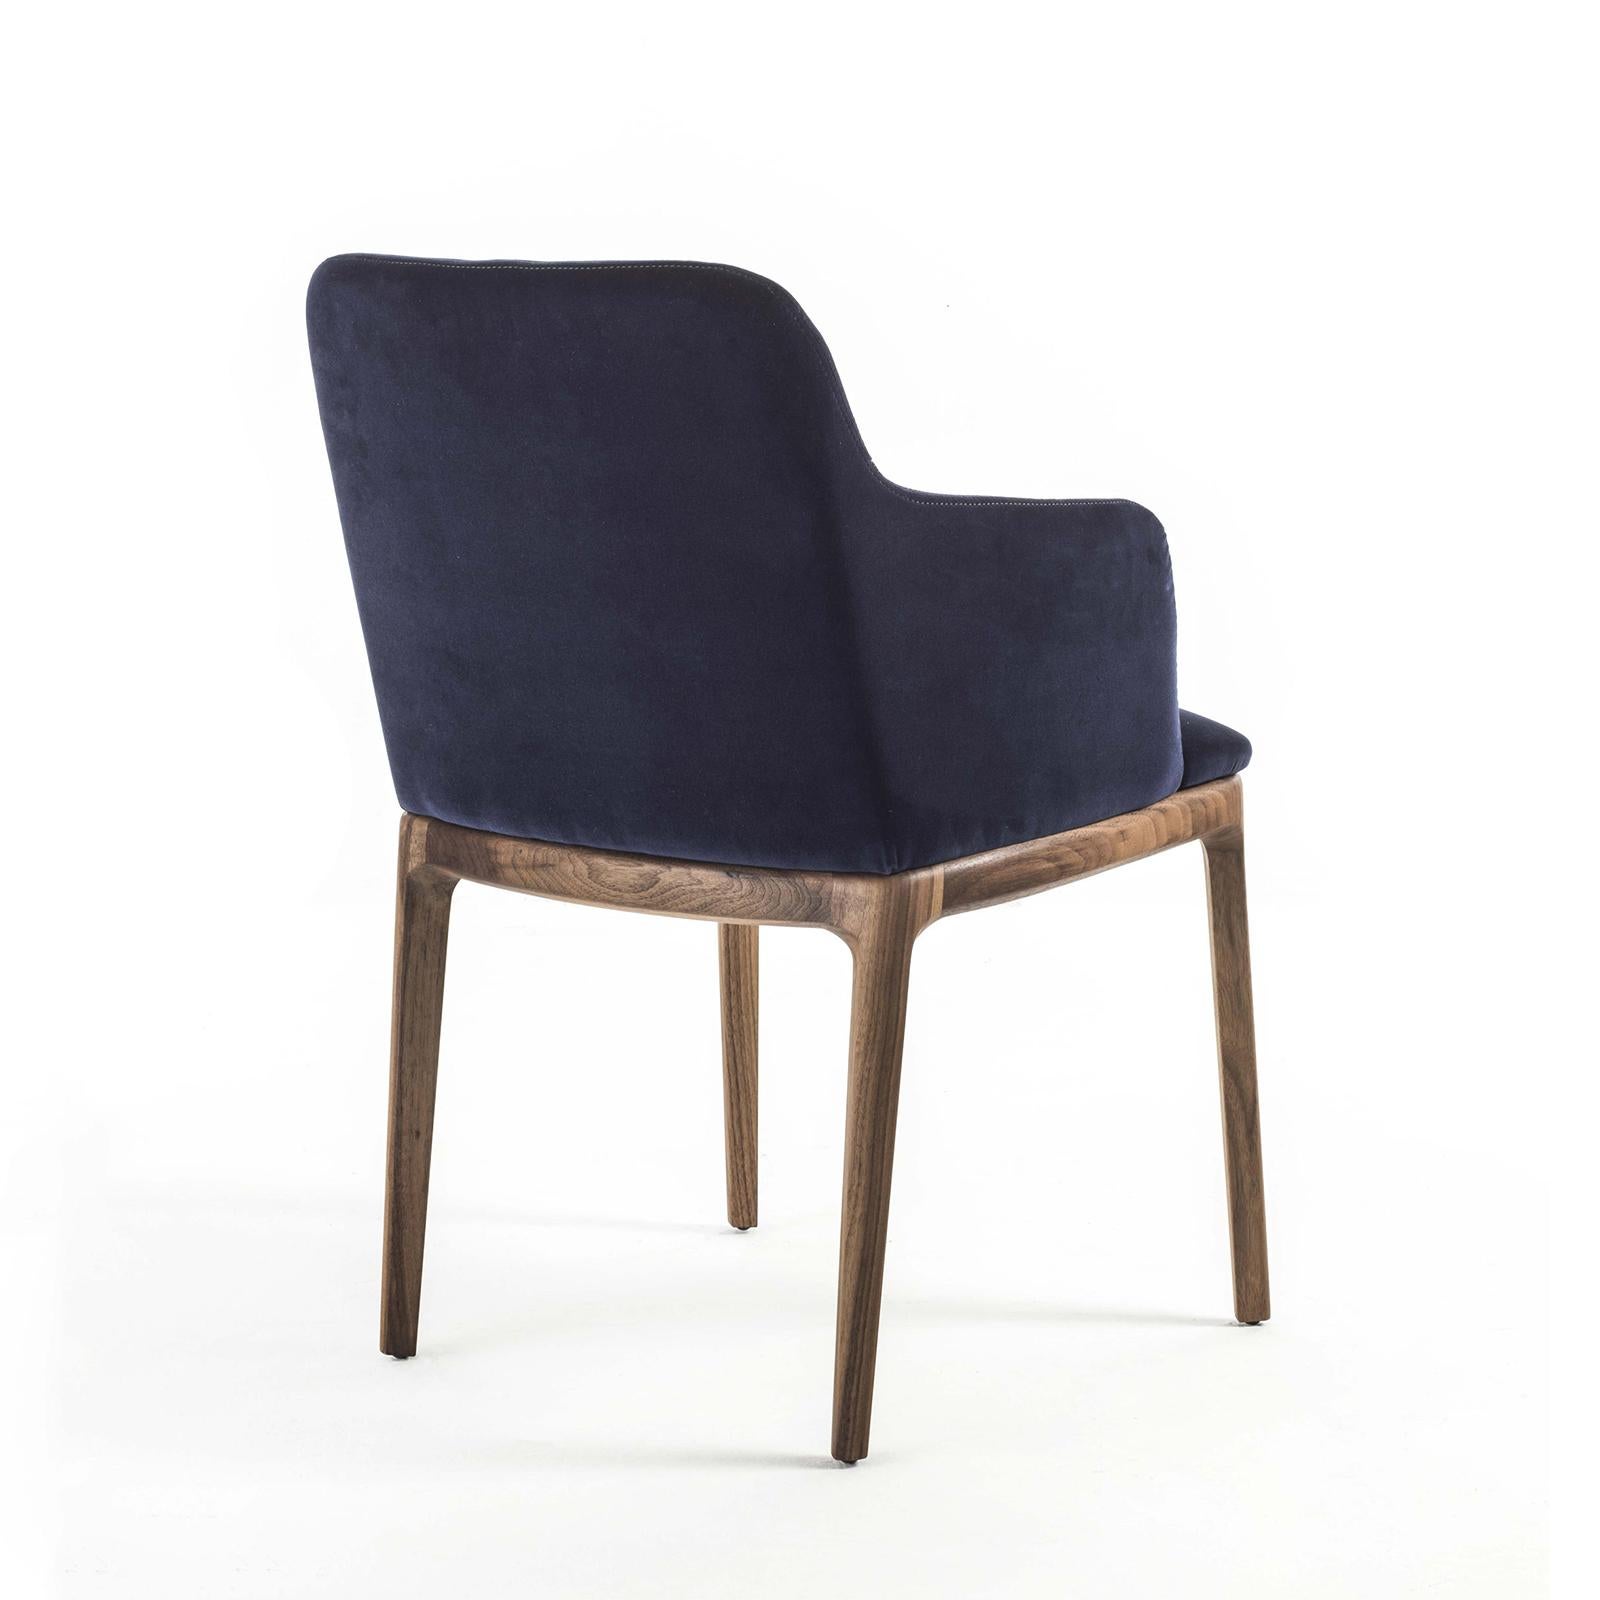 Armchair velvet walnut with structure in solid walnut wood,
plished and treated with natural pine extracts. Upholstered
and covered with high quality blue deep velvet fabric.
Also available in velvet walnut chair, without armrests.
Also available